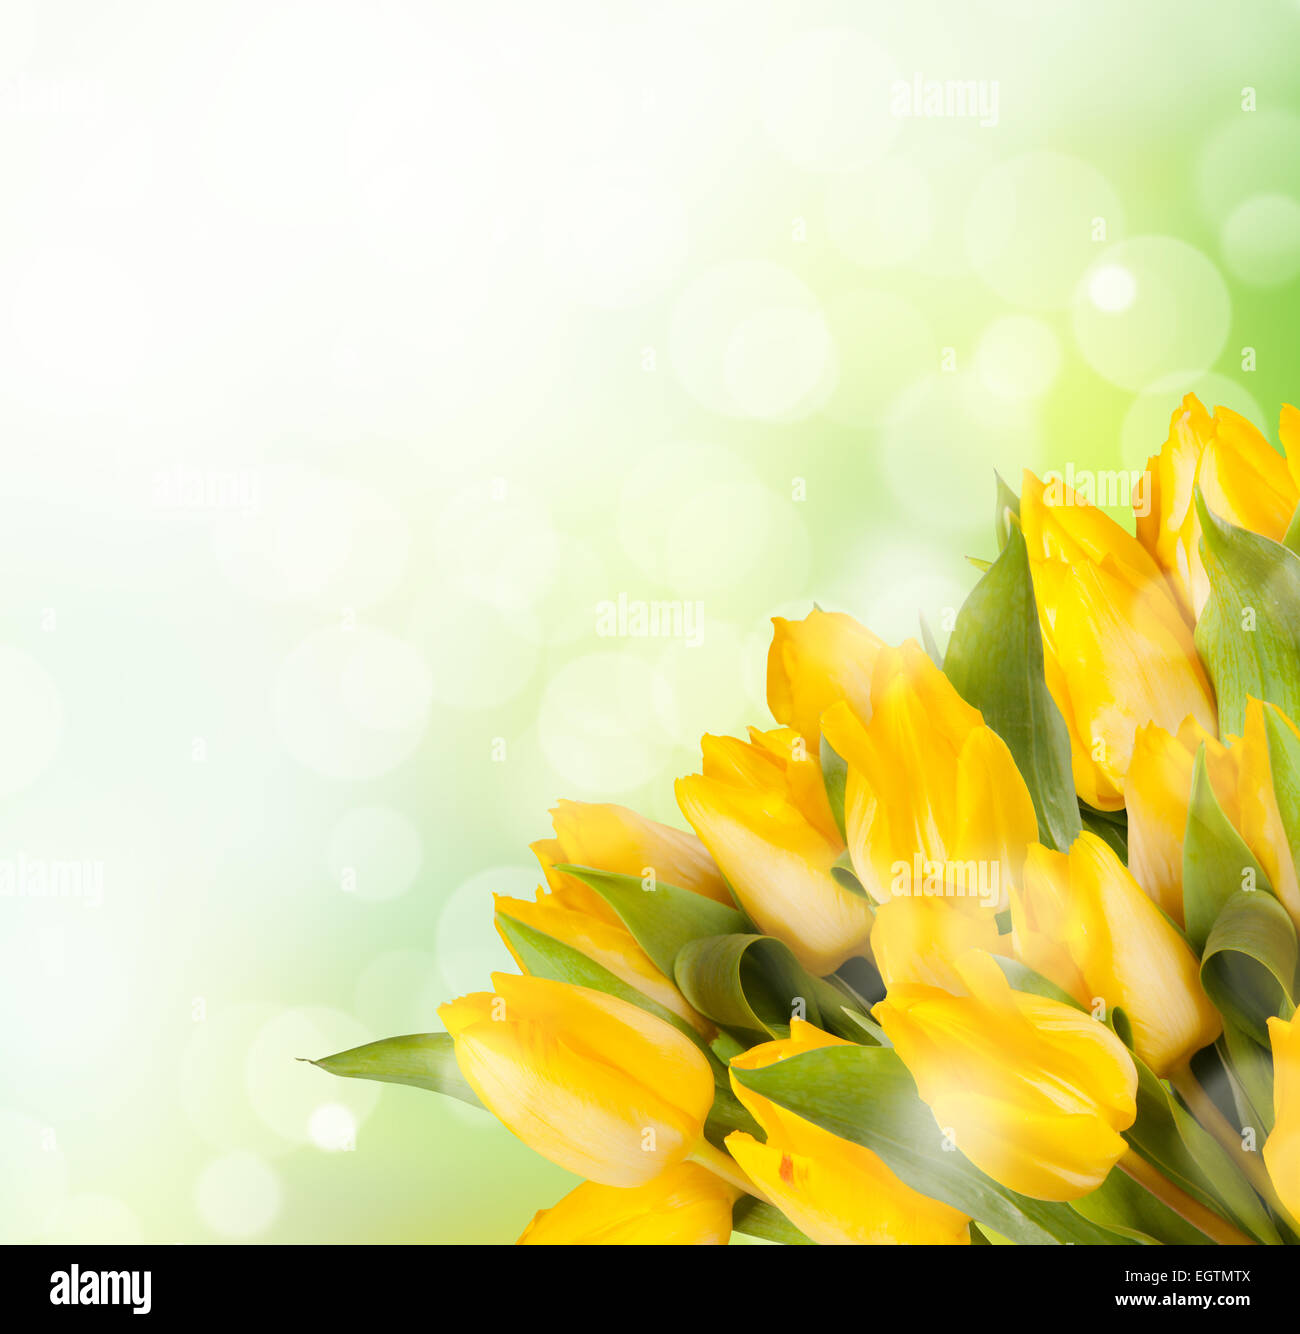 Boquet of yellow tulips with copyspace for text Stock Photo